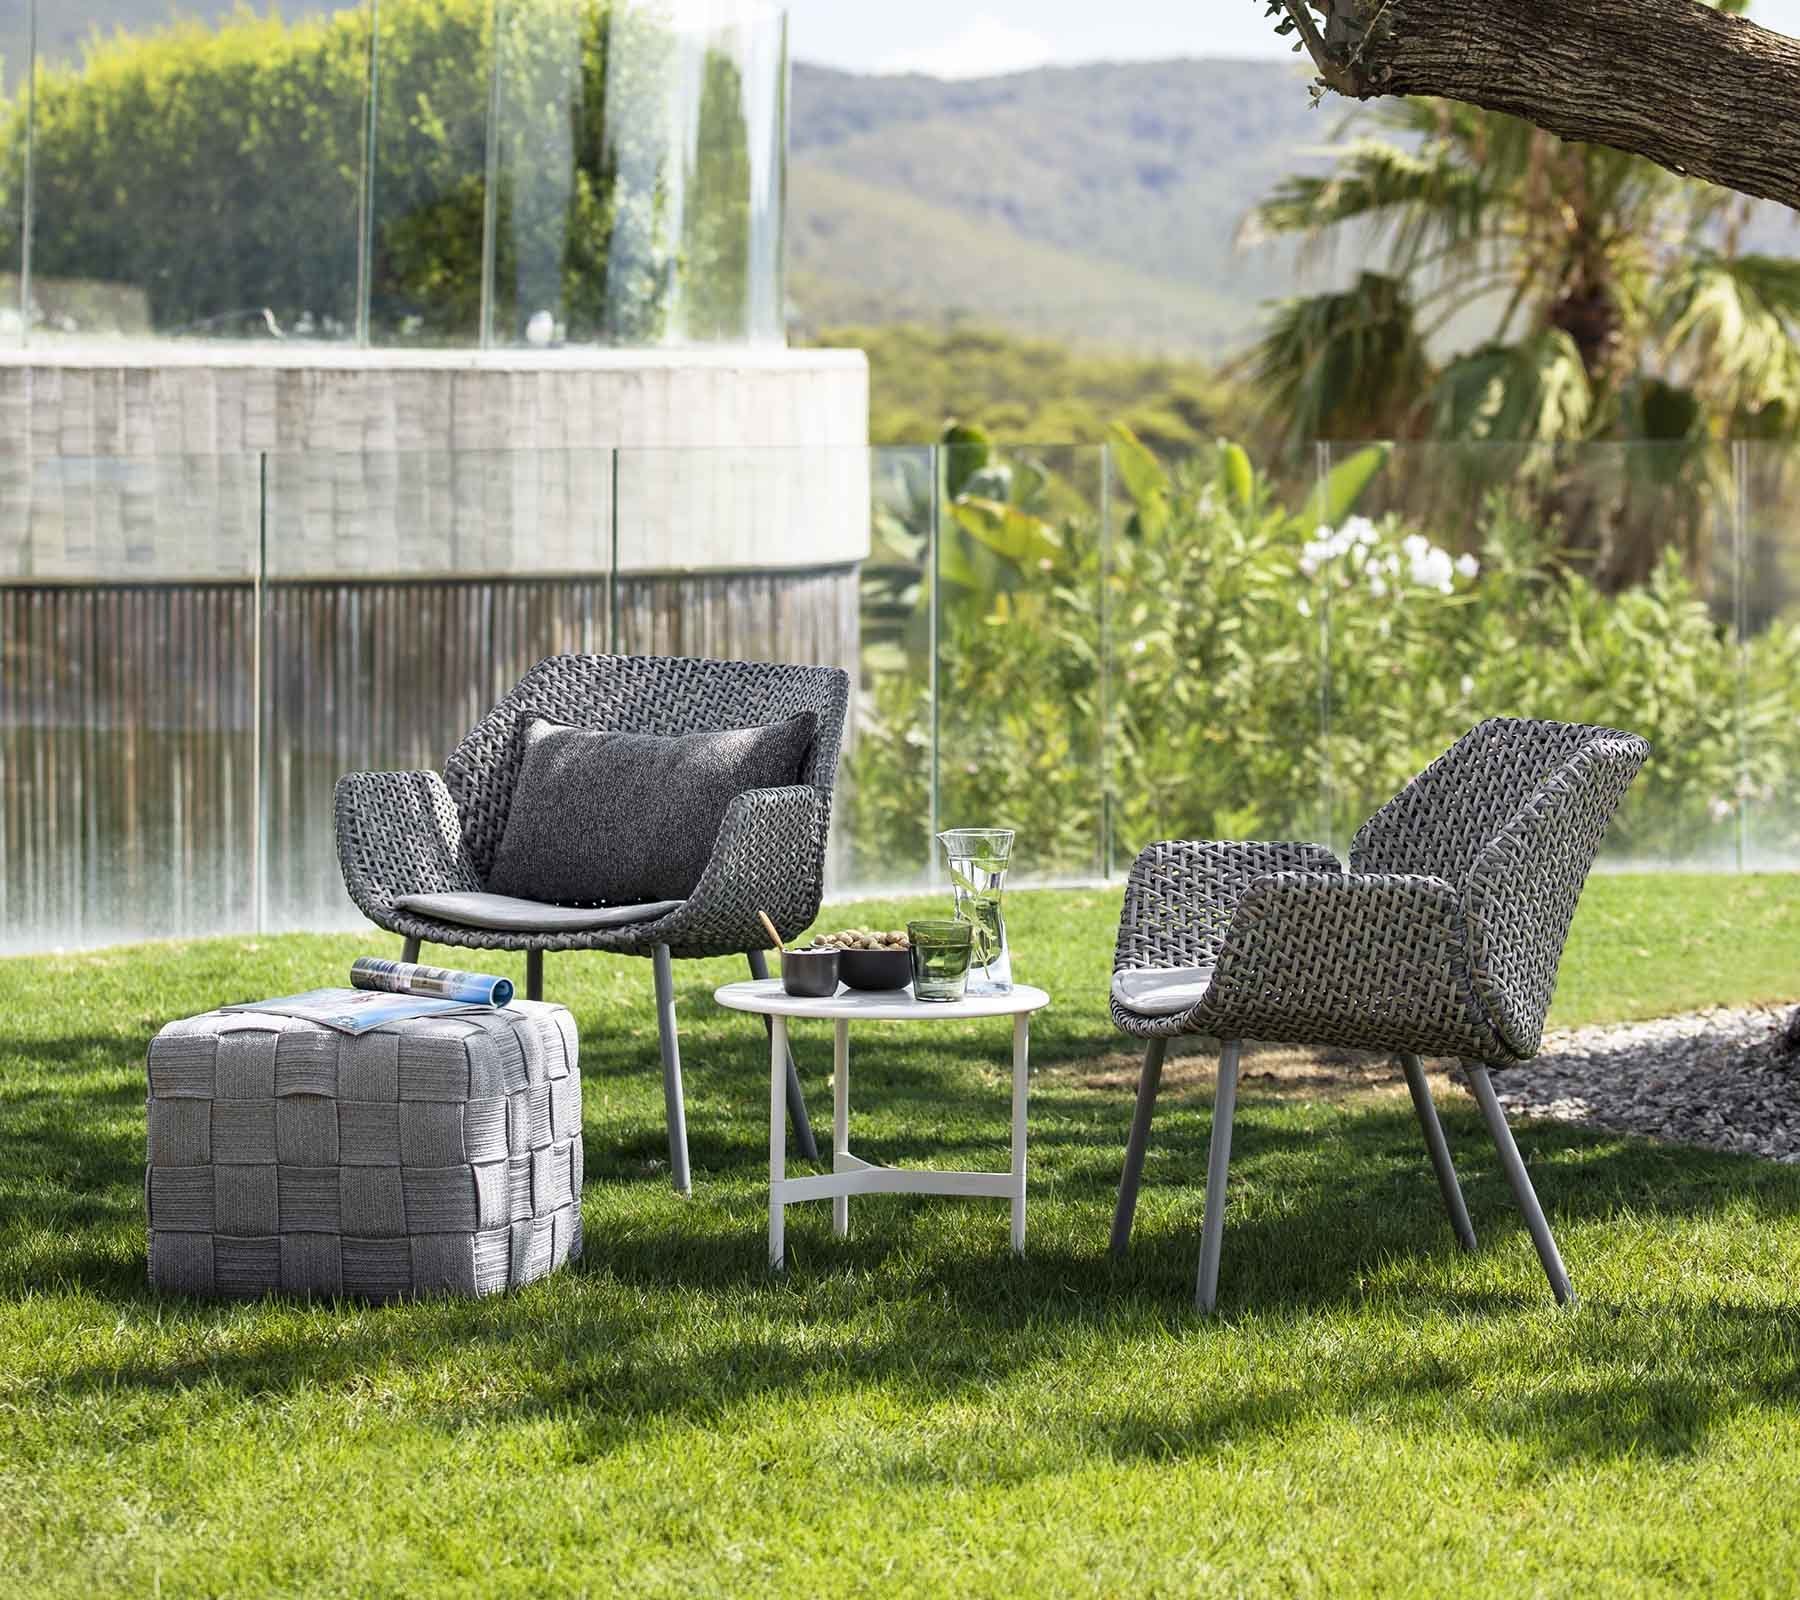 Vibe Chair lounge from Cane-line, designed by Welling/Ludvik